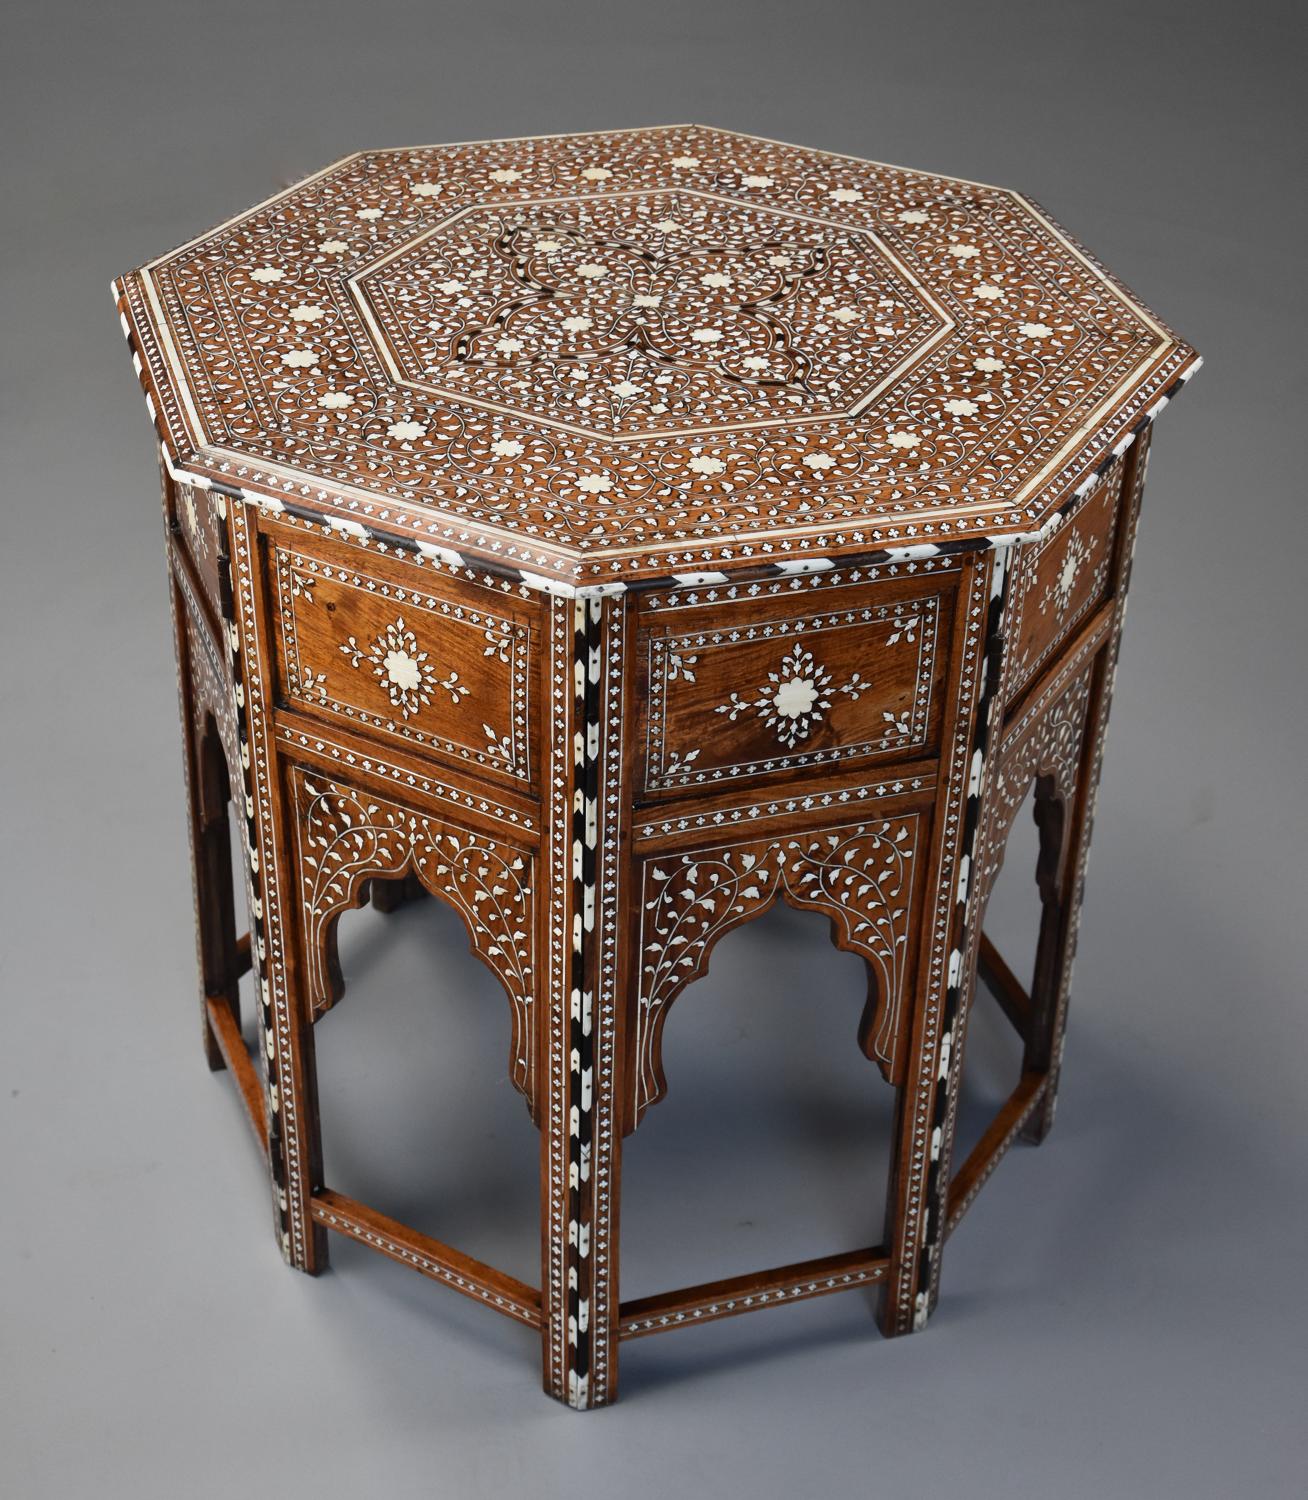 Superb quality 19thc Anglo Indian inlaid hardwood octagonal table